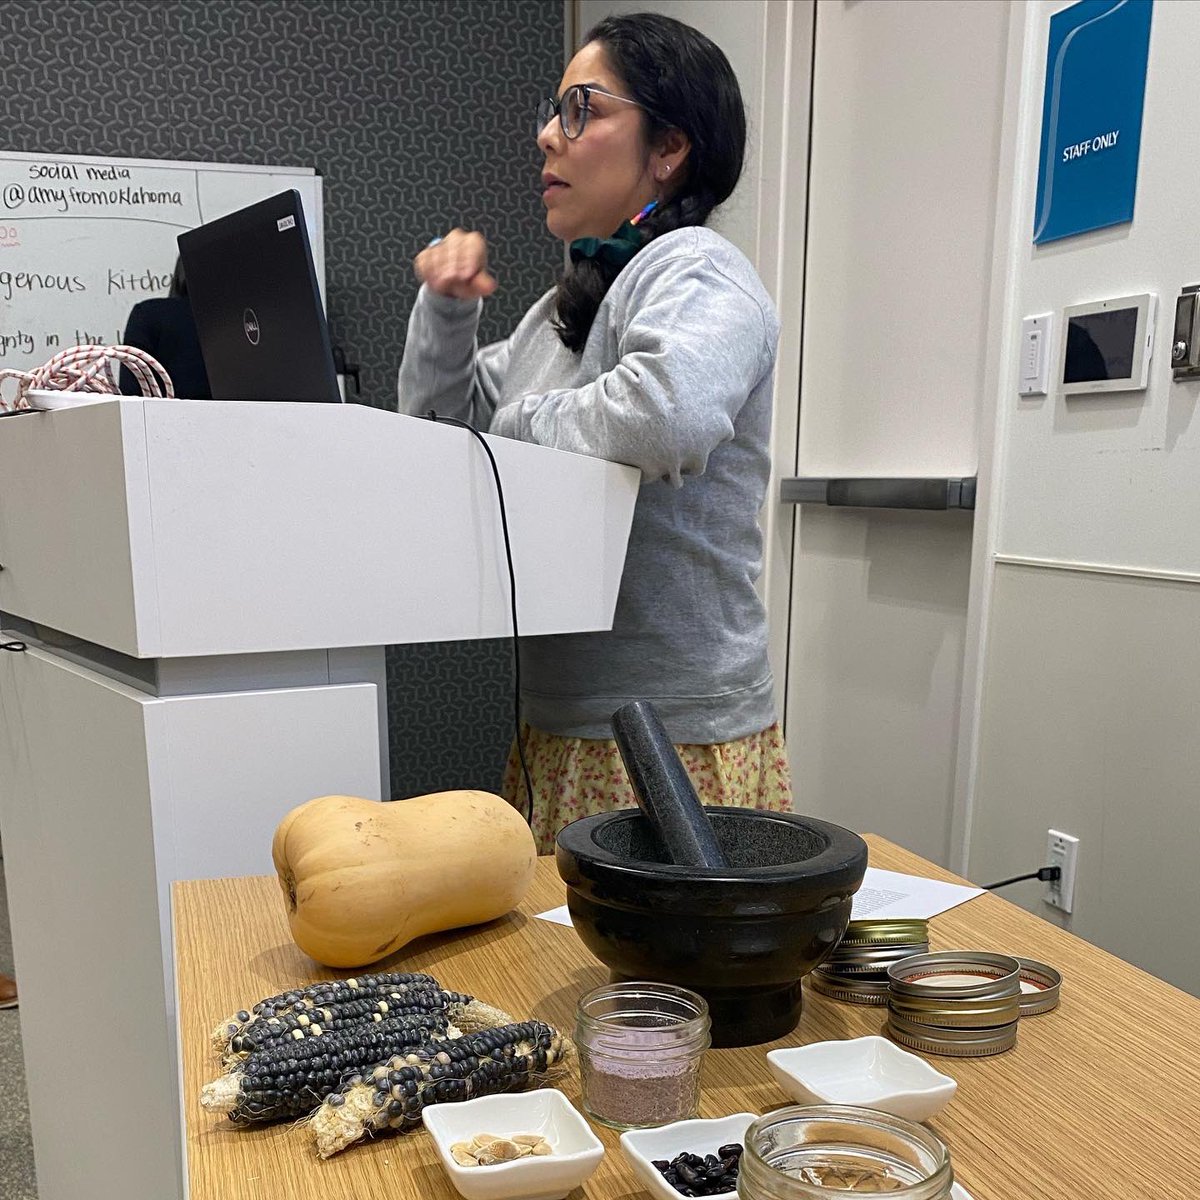 Happy #NativeAmericanHeritageDay! Mvto to @MetroLibraryOK at Capitol Hill for having me speak last week on Indigenous Food Sovereignty. As a seed keeper, I was especially honored to bring heirloom seeds that survived the Trail of Tears and share their stories. As a dietitian,